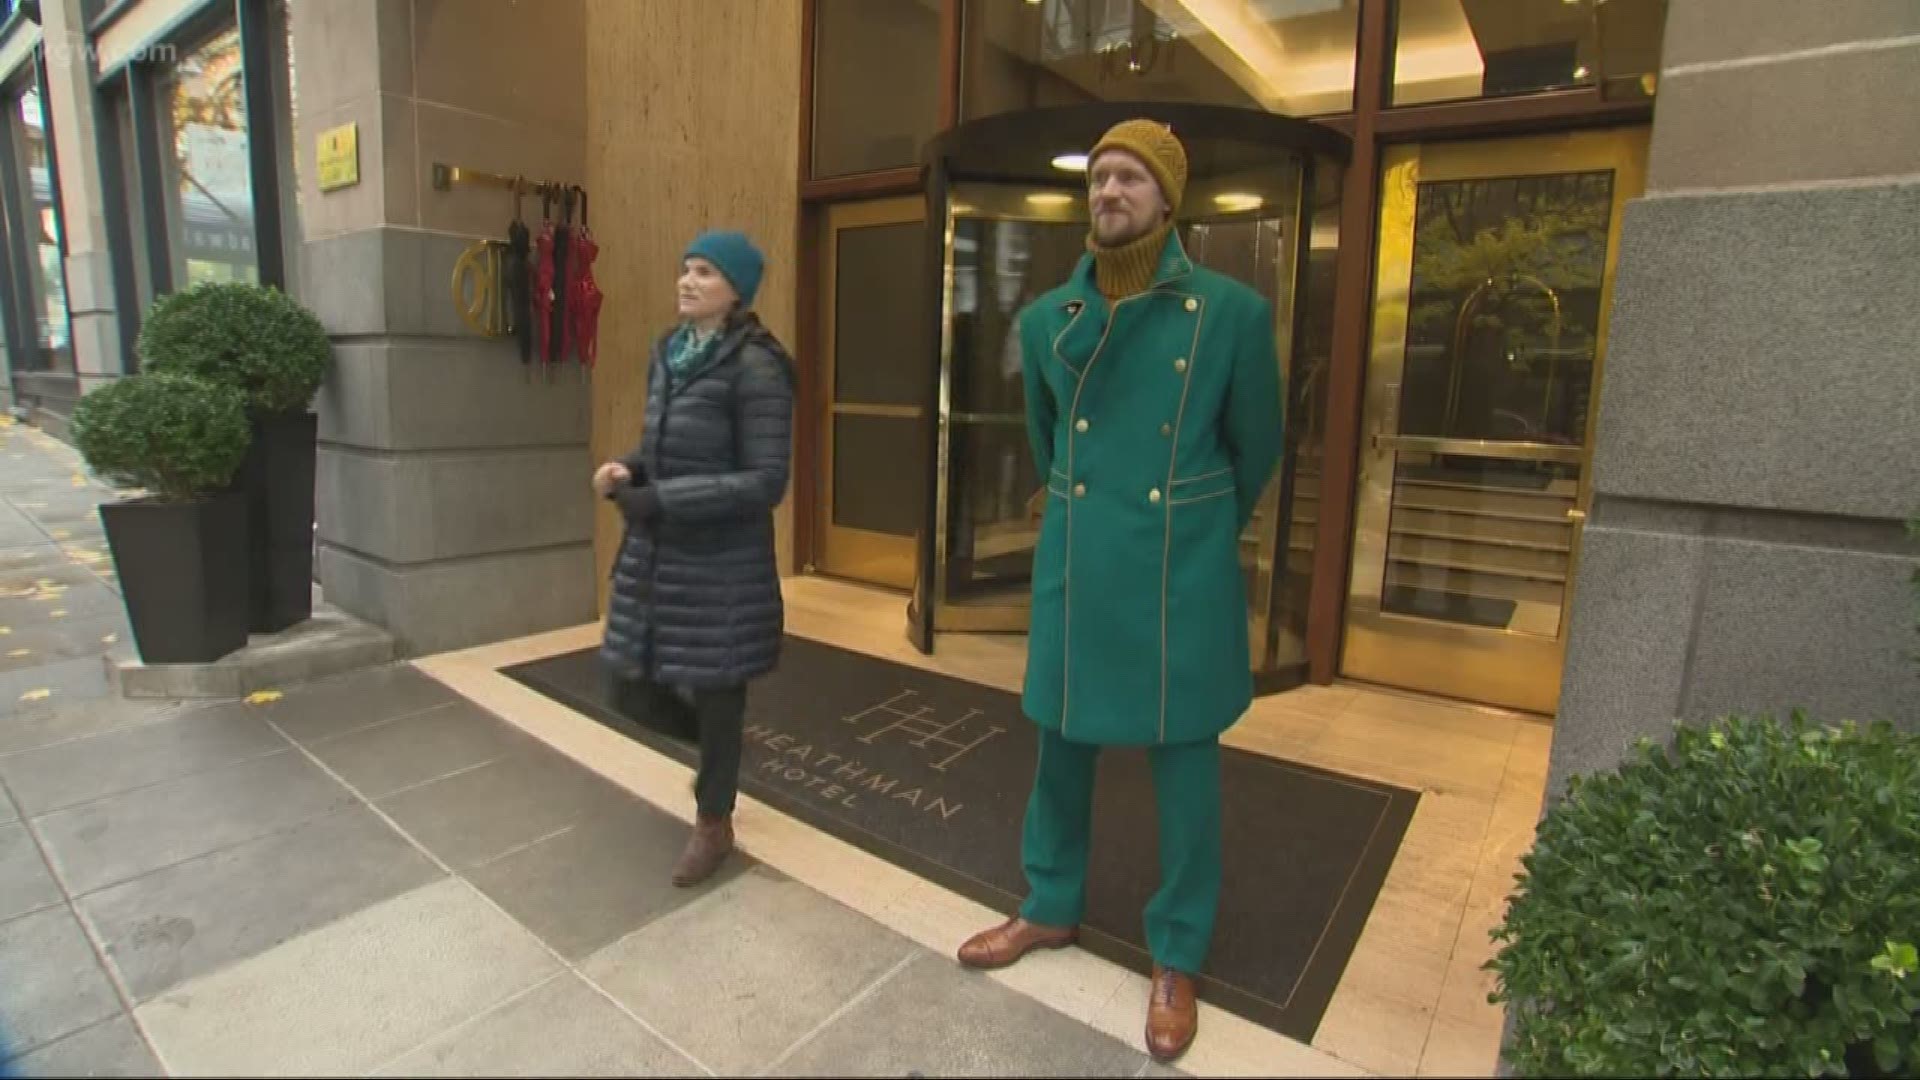 Workers at the Heathman Hotel in downtown Portland have new uniforms.